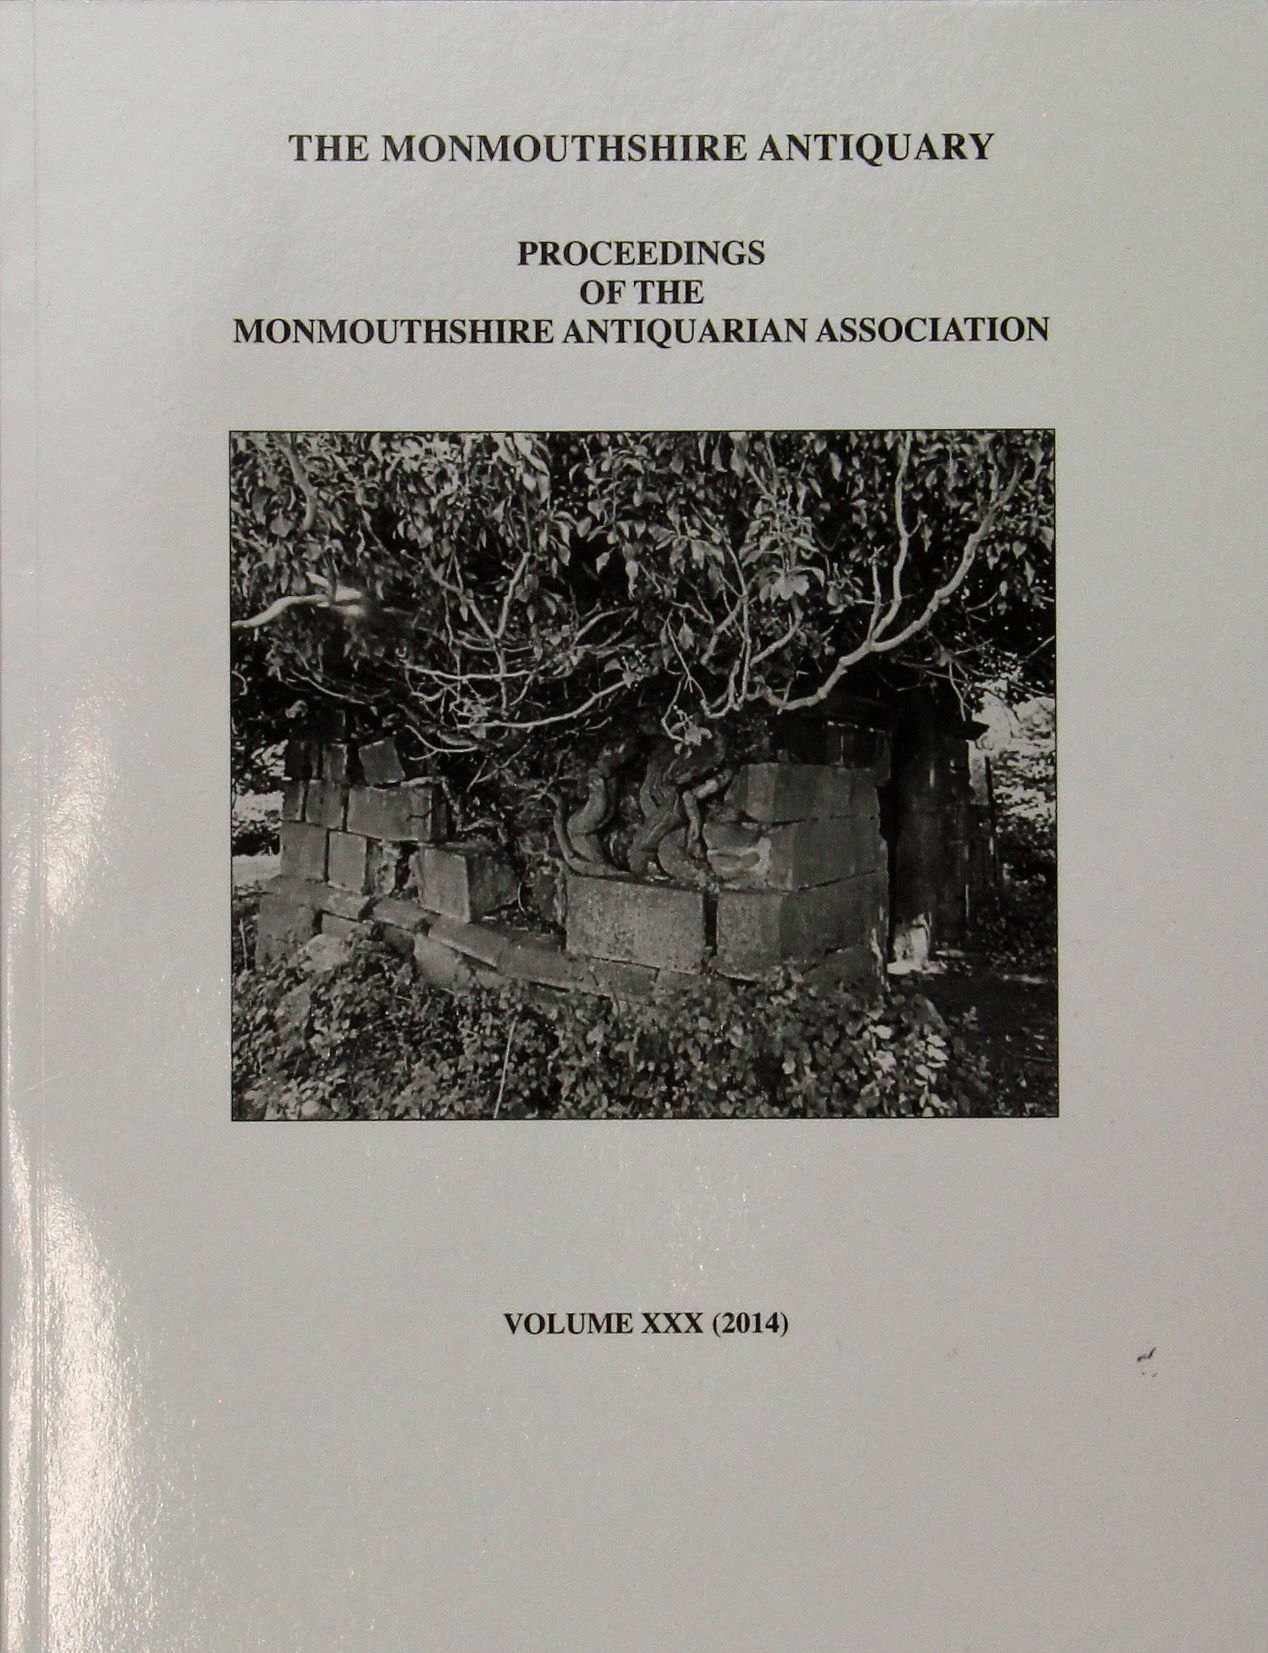 The Monmouthshire Antiquary Volume 30, 2014, Free (Donation of at least £2.00 to cover postage)